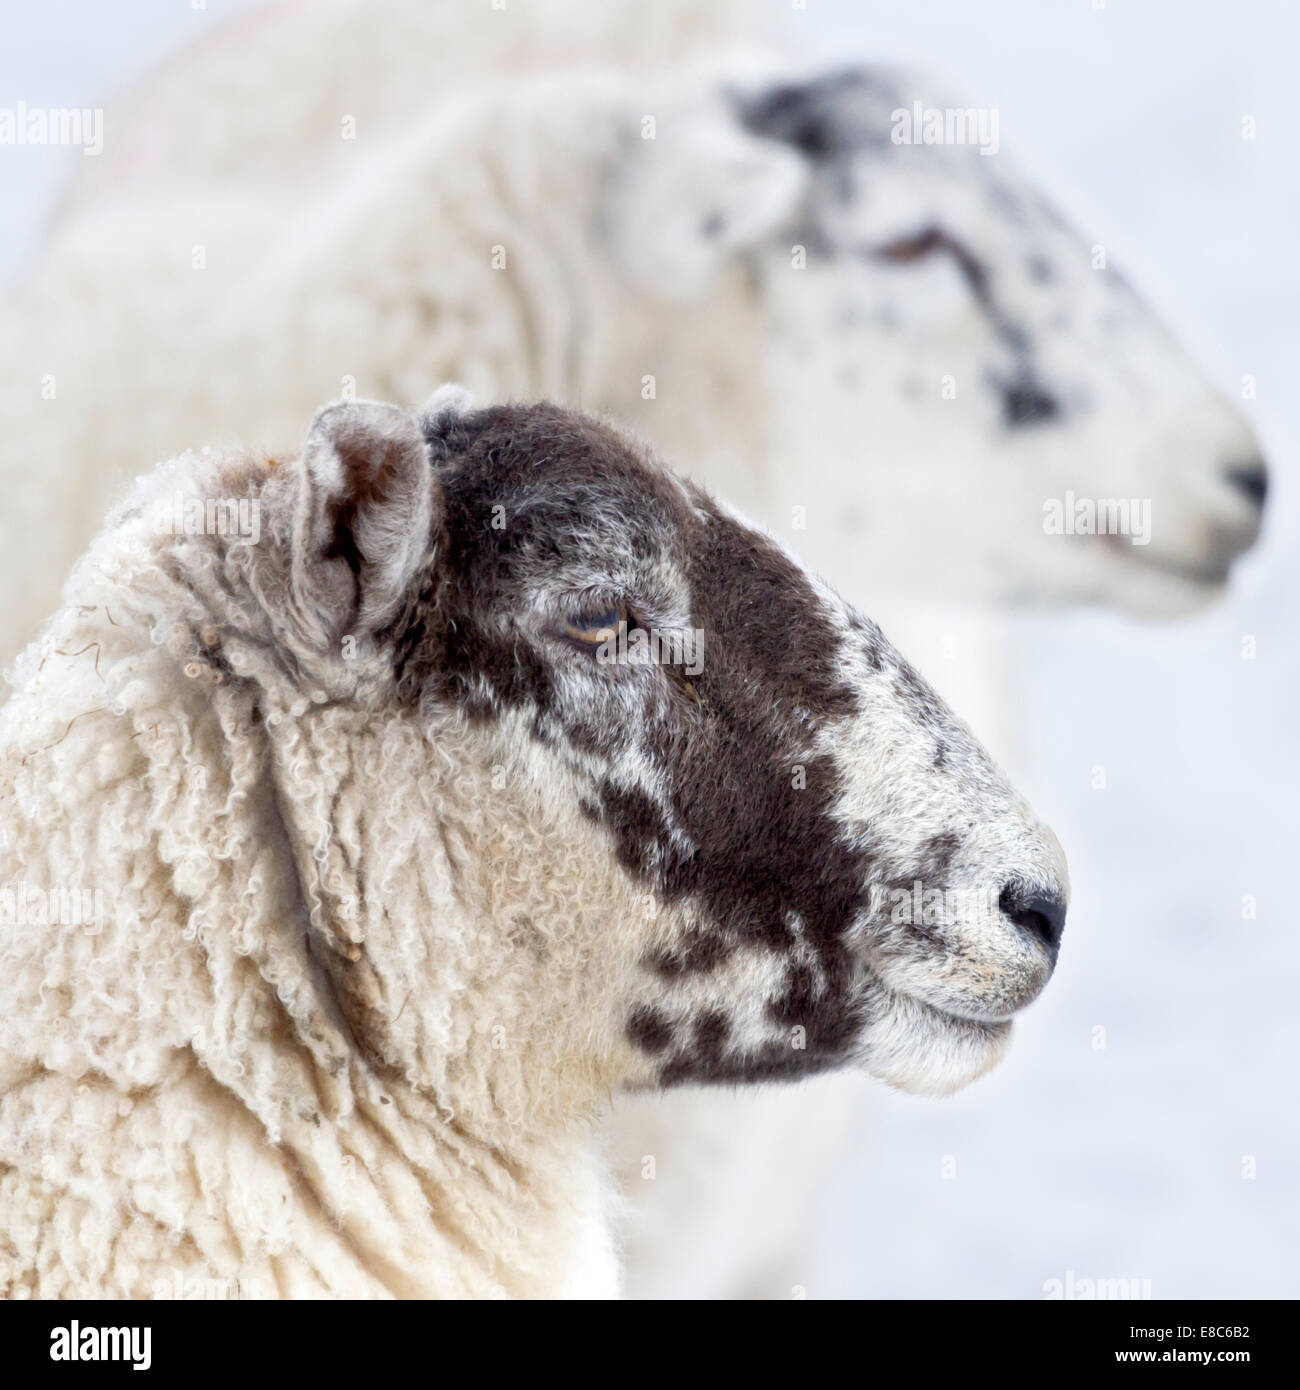 Sheep portrait close-up, The North Yorkshire Moors, England. Stock Photo